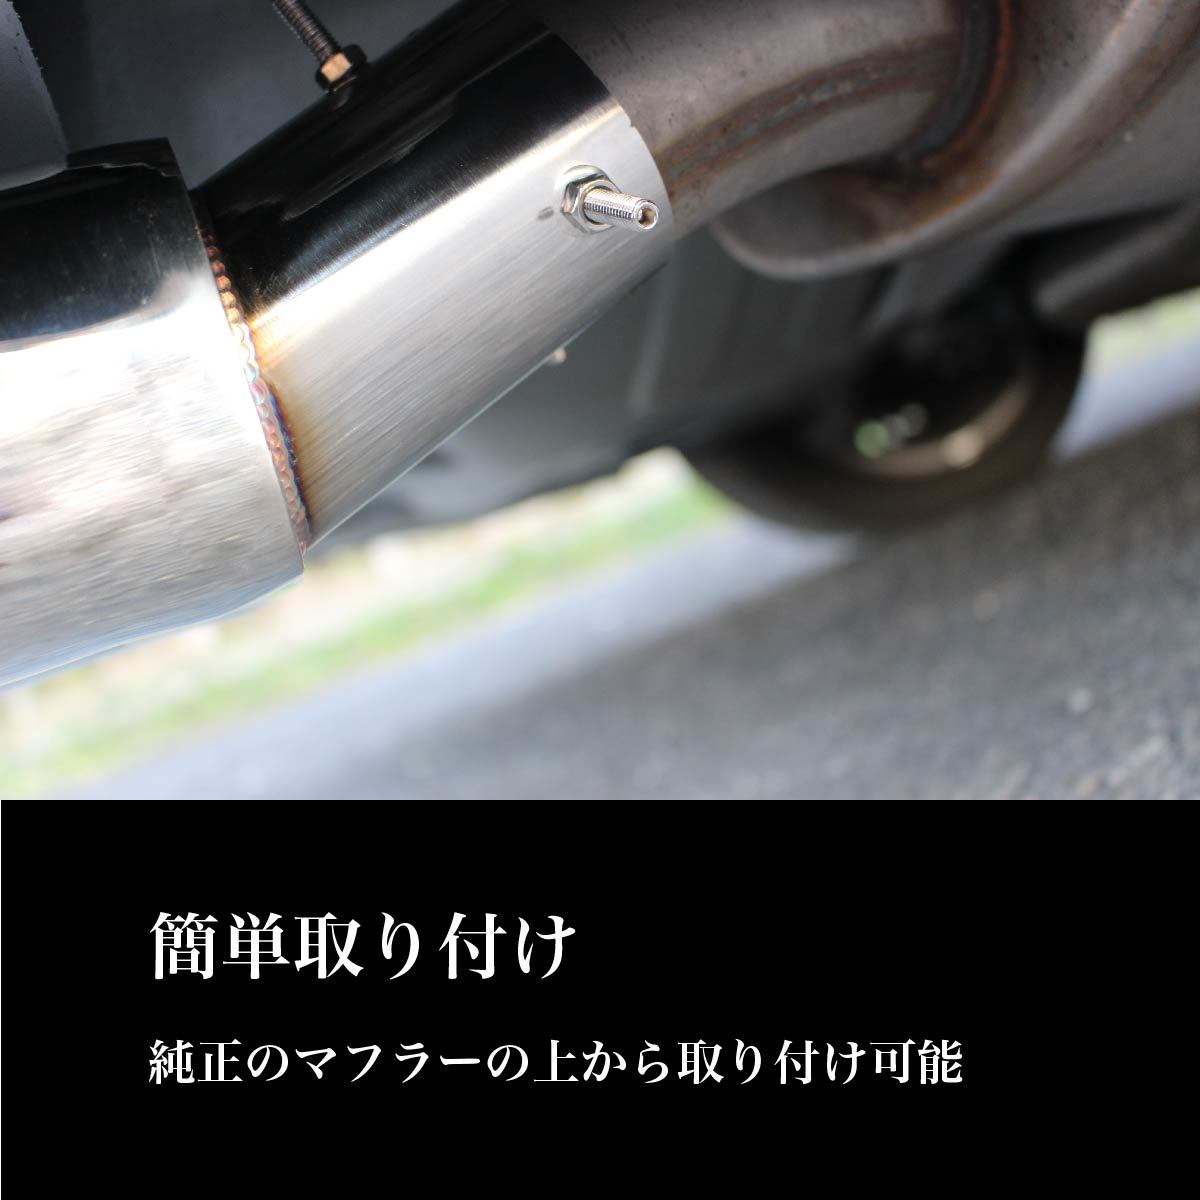  Toyota Alphard Vellfire 30 series square muffler cutter made of stainless steel titanium color accessories exterior parts car make special design 3